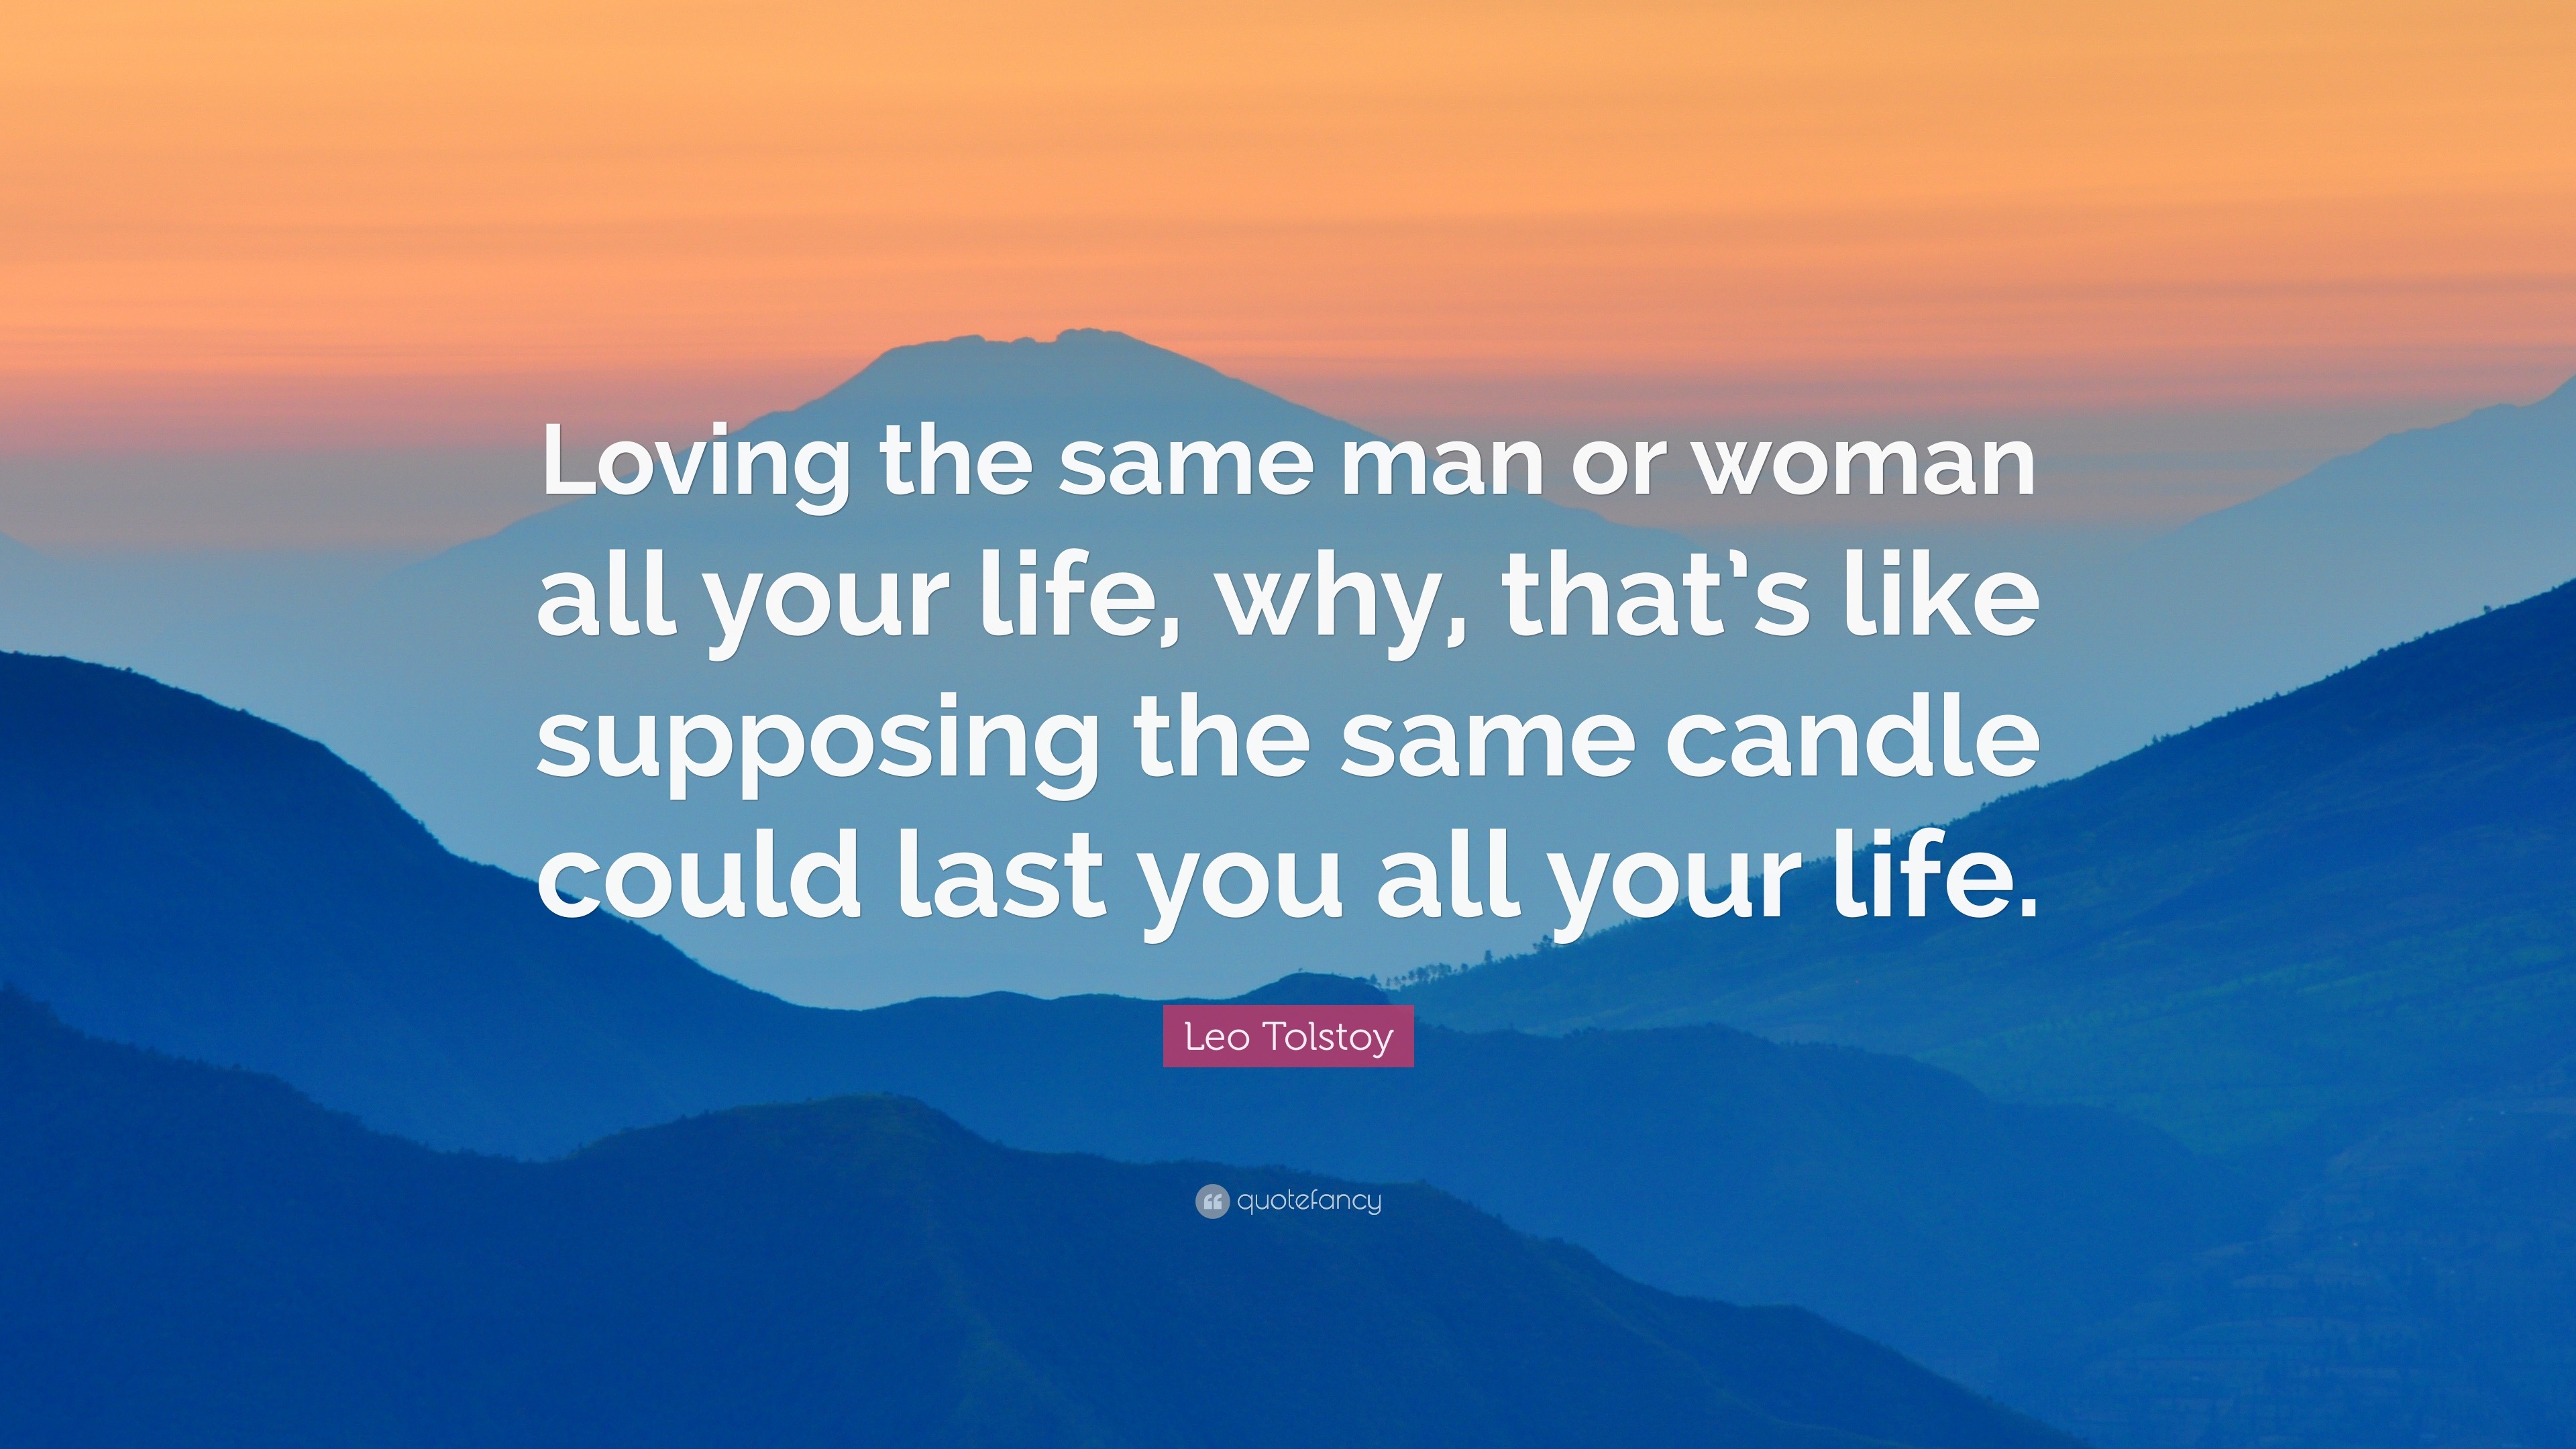 Leo Tolstoy Quote “Loving the same man or woman all your life why